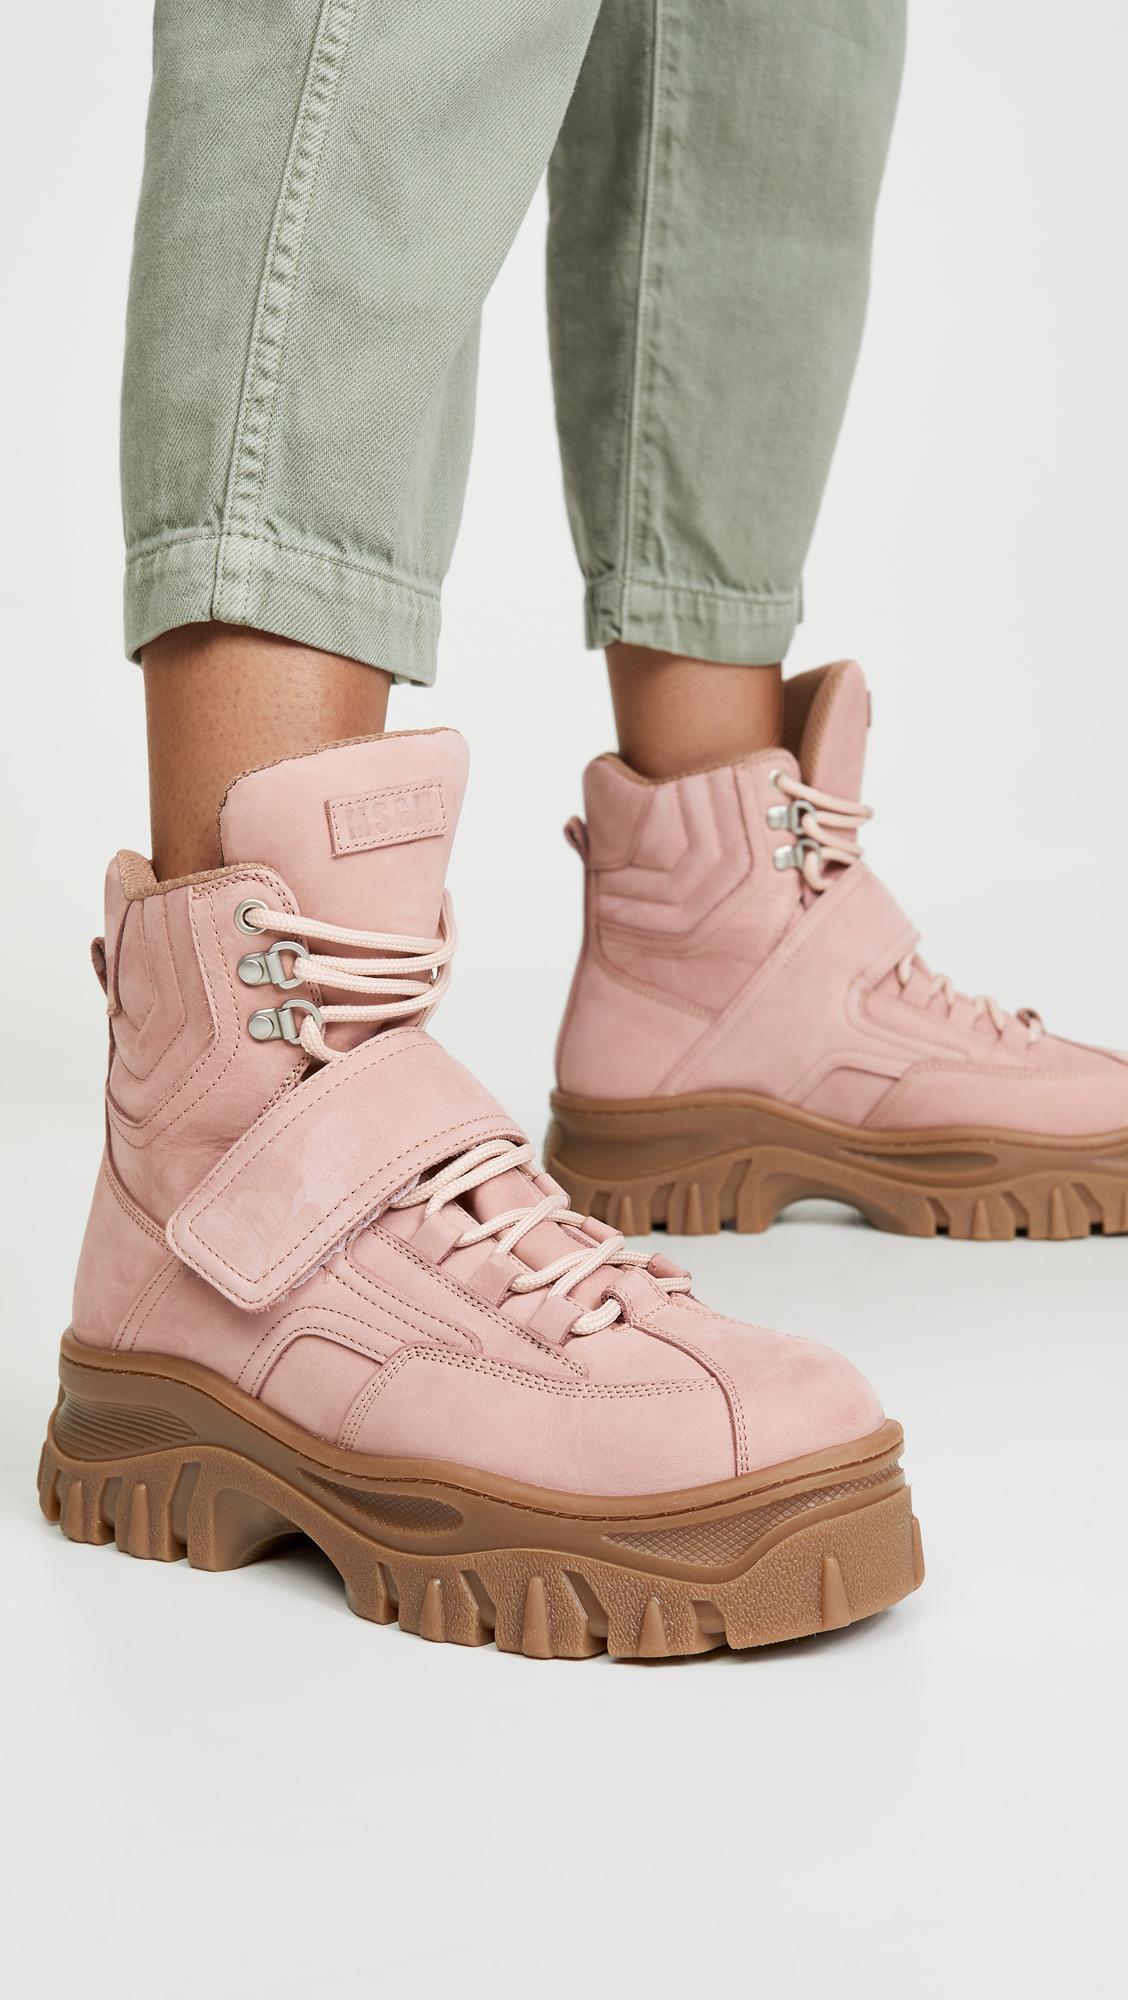 MSGM Chunky Strap Sneaker Boots in Pink | Lyst